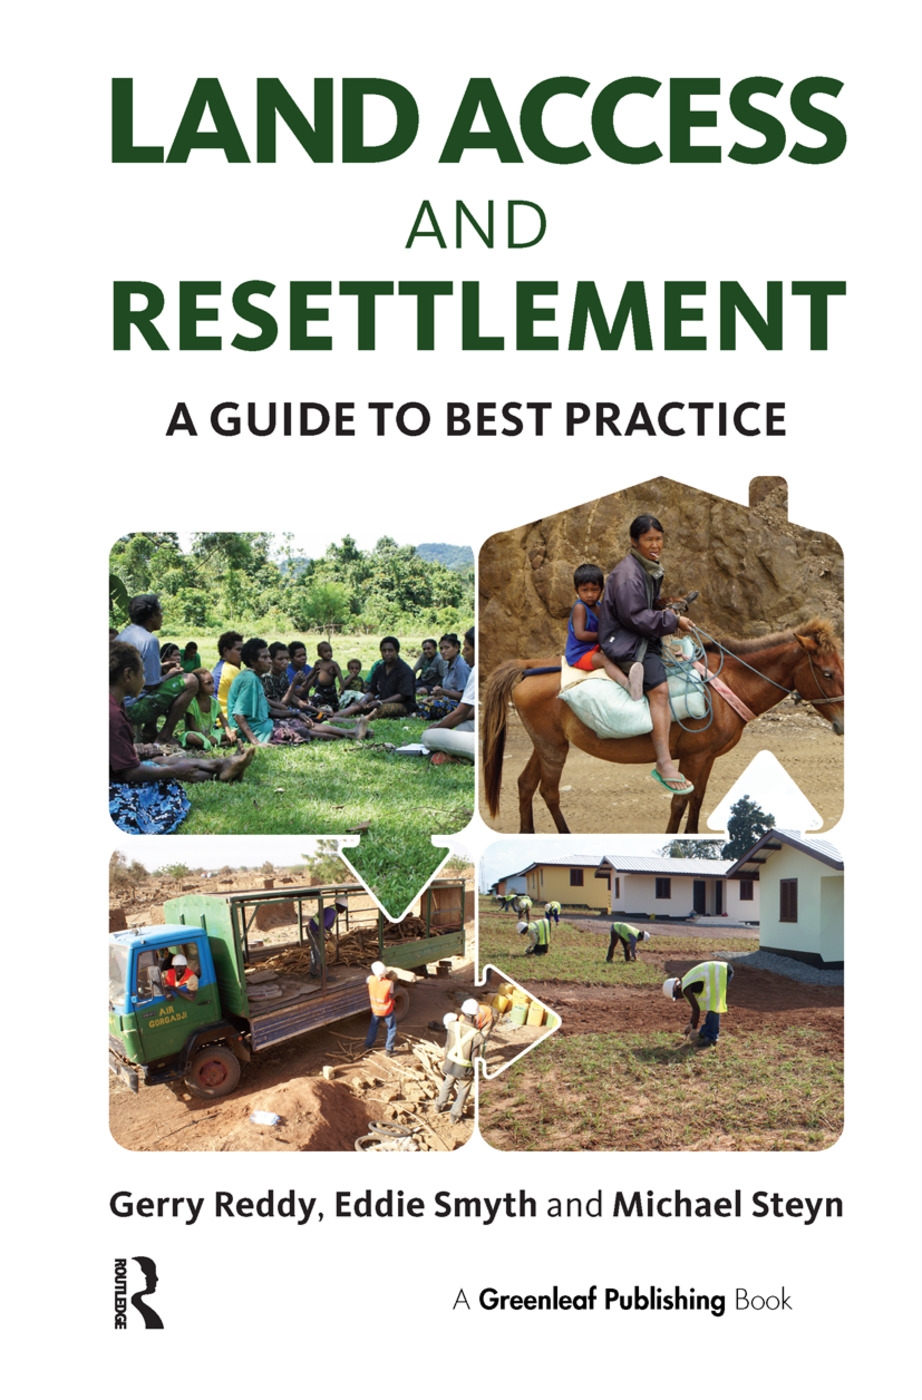 Land Access and Resettlement: A Guide to Best Practice